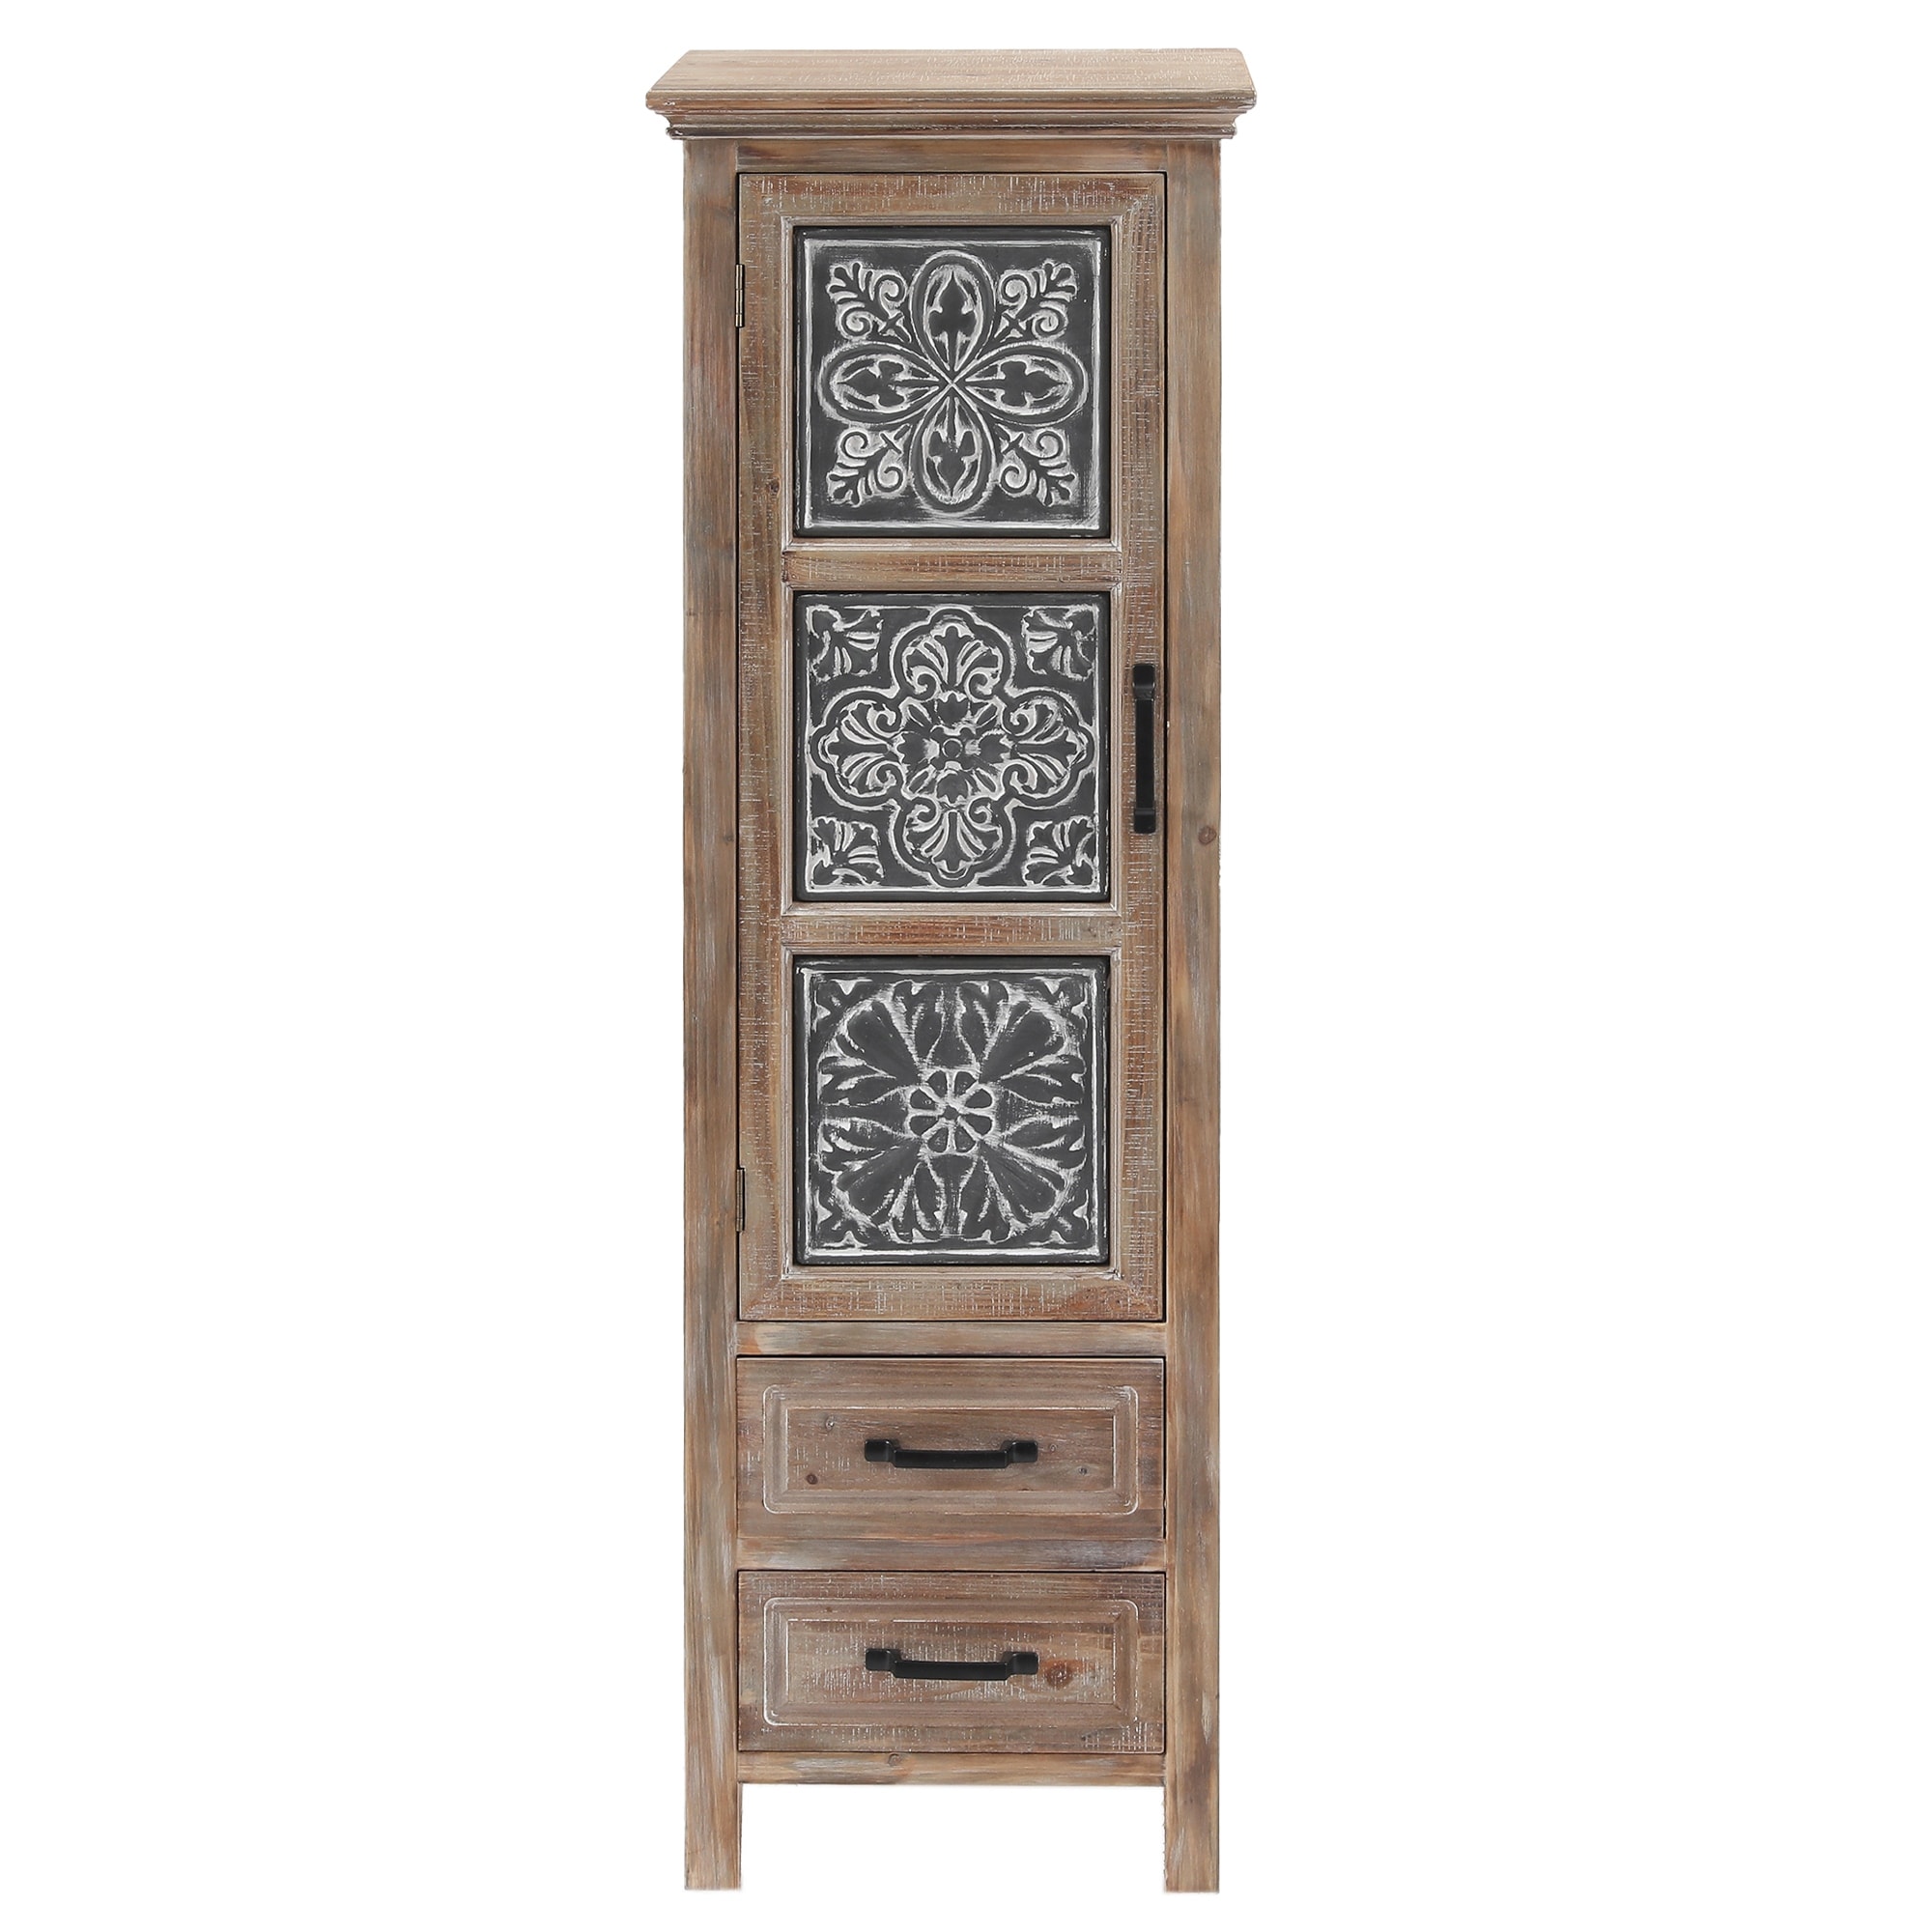 https://ak1.ostkcdn.com/images/products/is/images/direct/e323d19bdc4b2445895fa817ee73dc21cb84361b/Metal-and-Wood-Tall-Tower-Cabinet.jpg